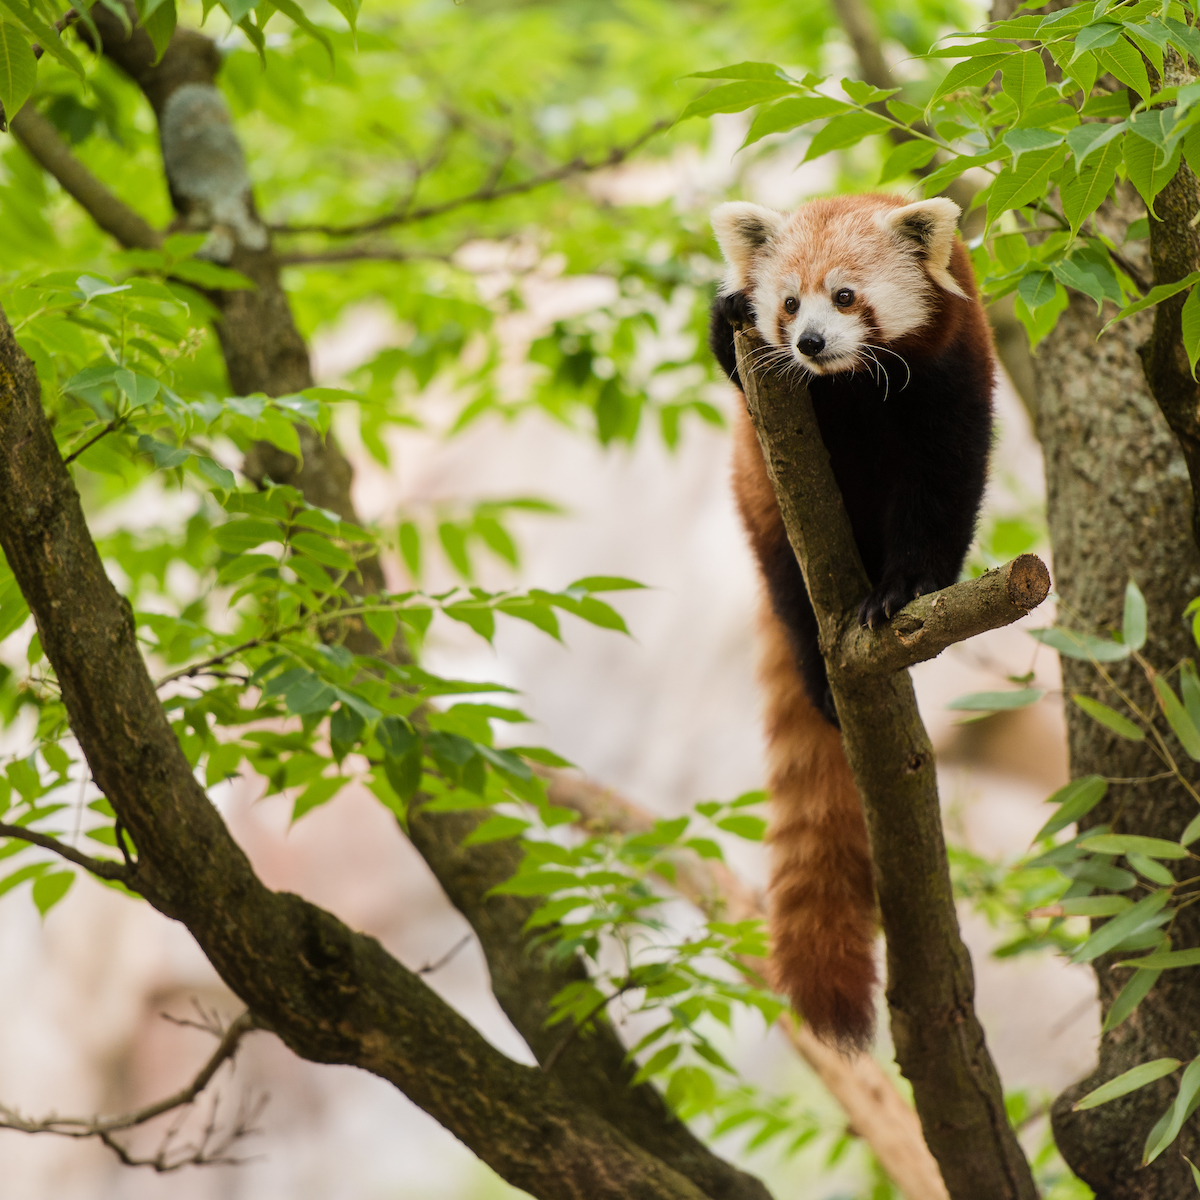 Red panda at the Smithsonian National Zoological Park